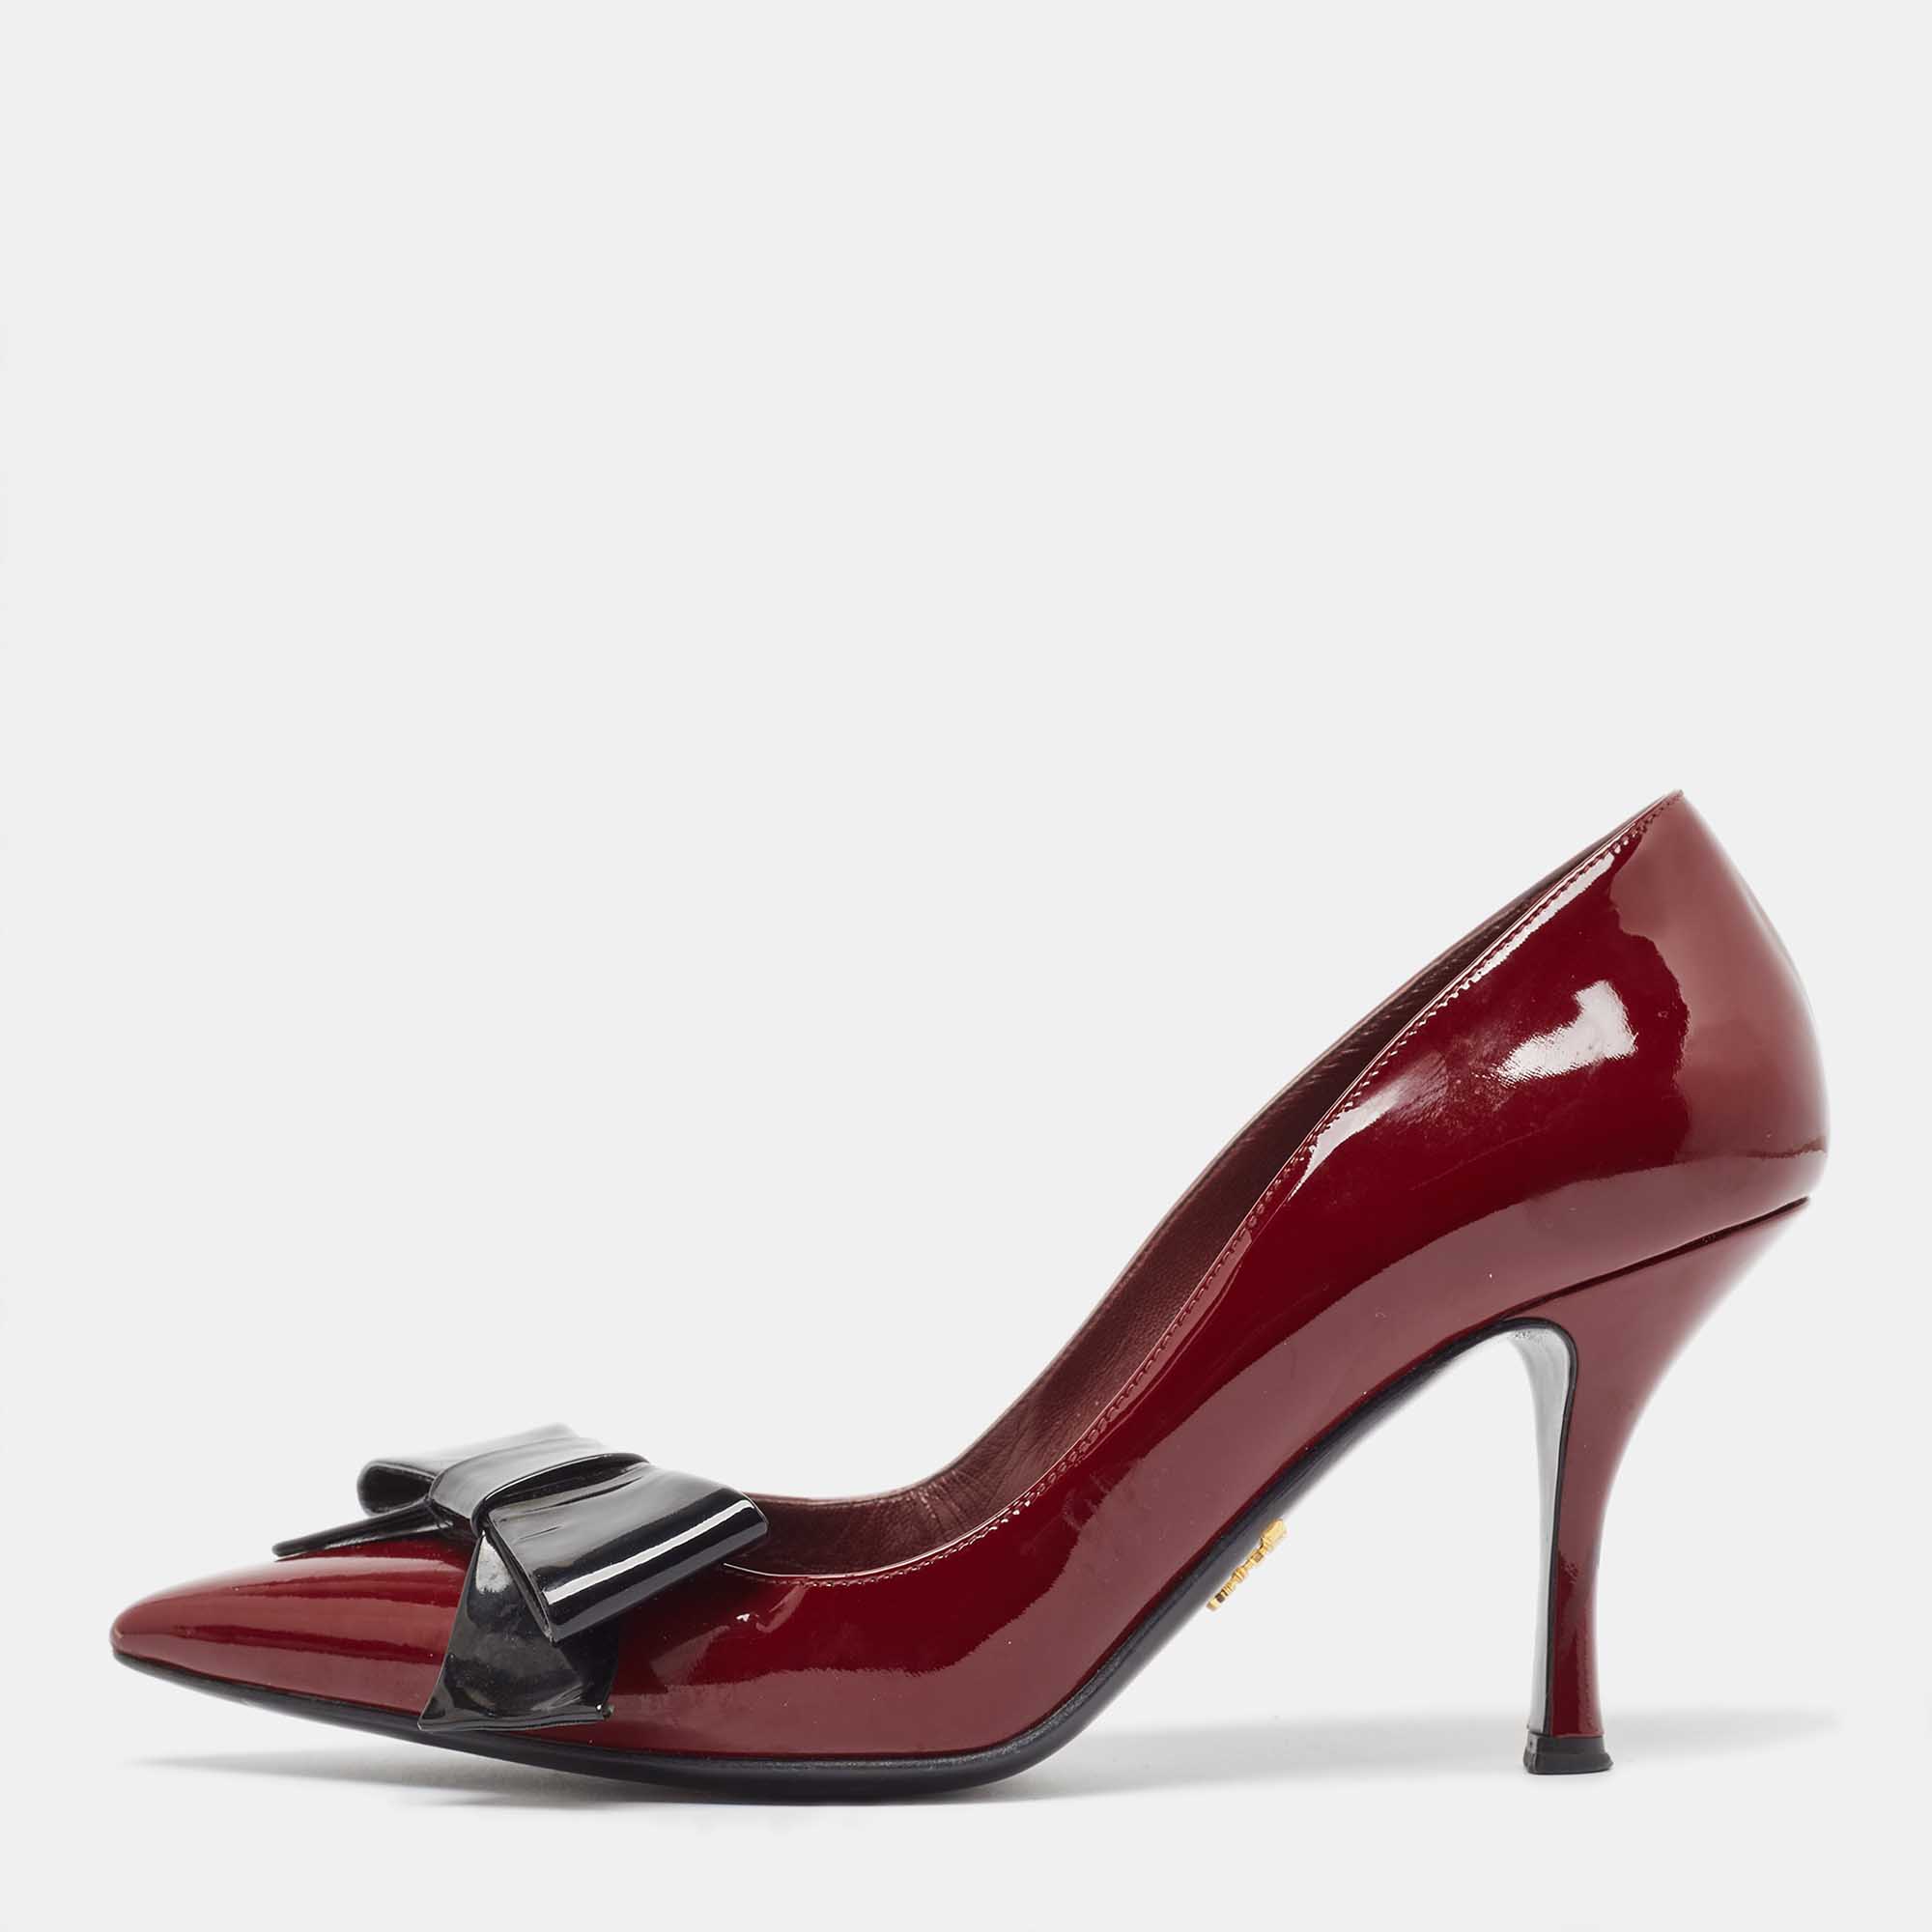 Pre-owned Prada Burgundy Patent Leather Bow Pointed Toe Pumps Size 38.5